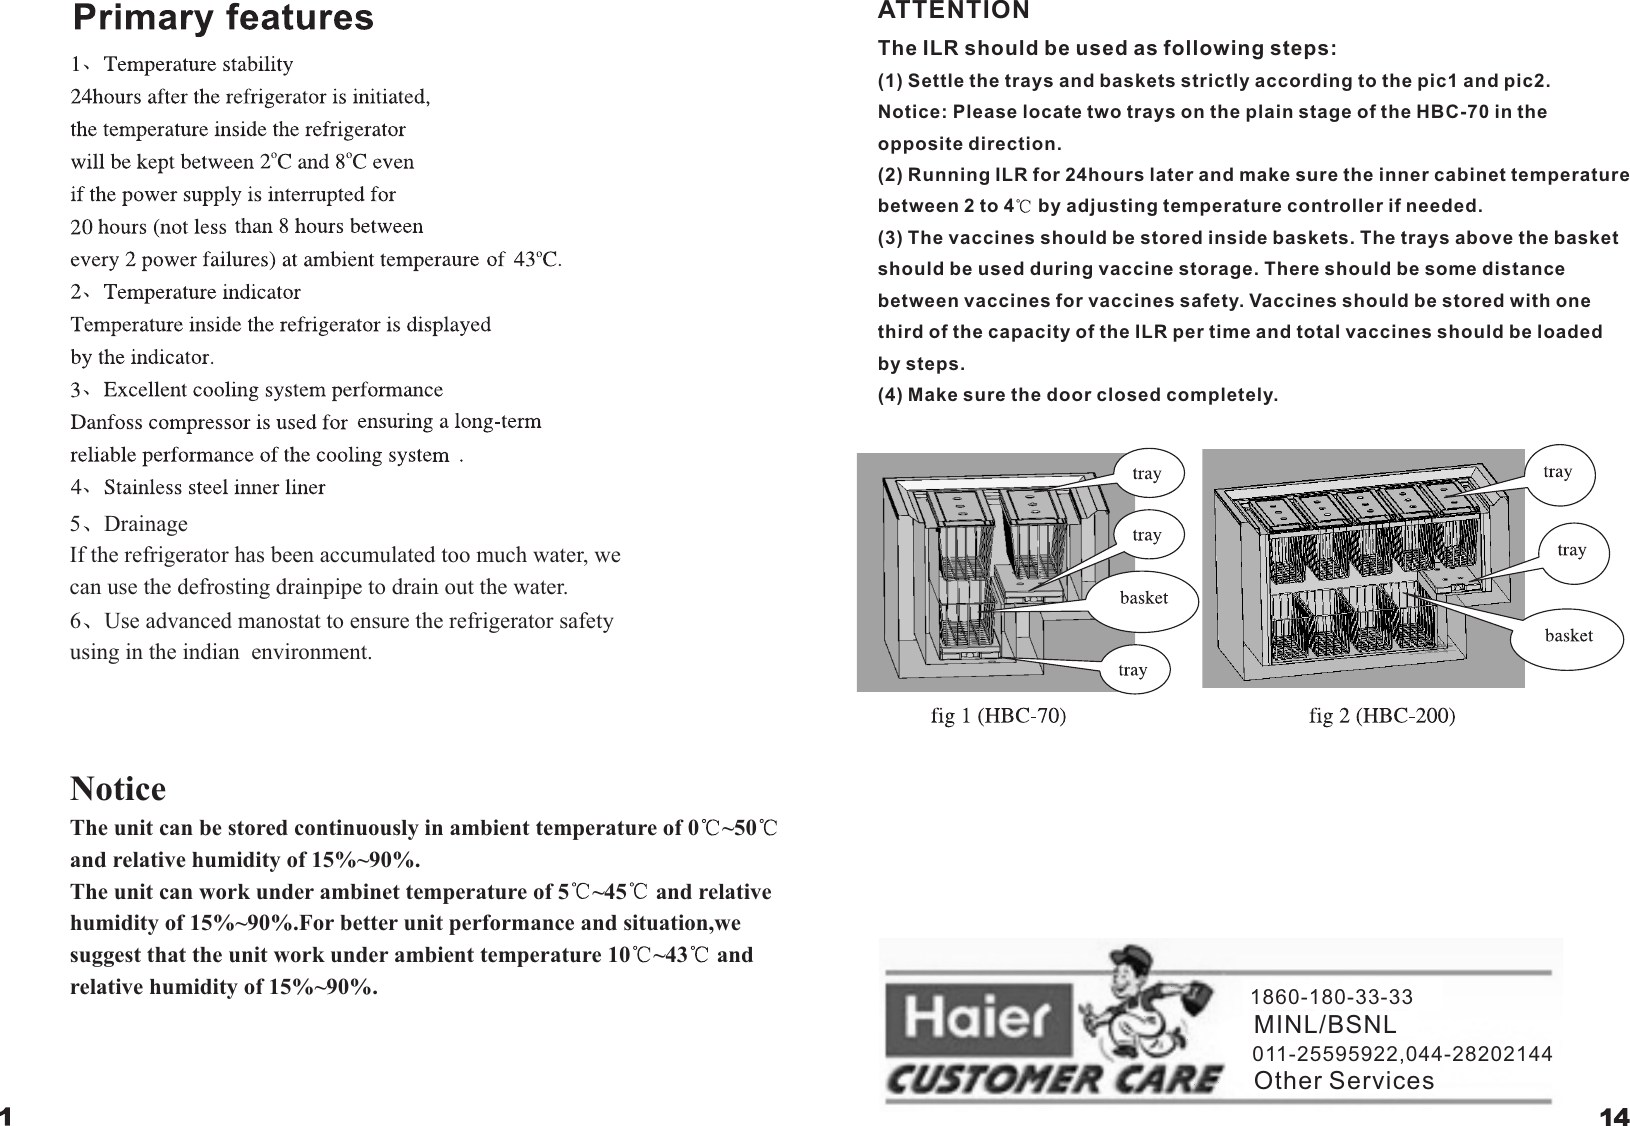 Page 2 of 8 - Haier Haier-Haier-Refrigerator-Hbc-200-Users-Manual- 0070507563..70A......  Haier-haier-refrigerator-hbc-200-users-manual